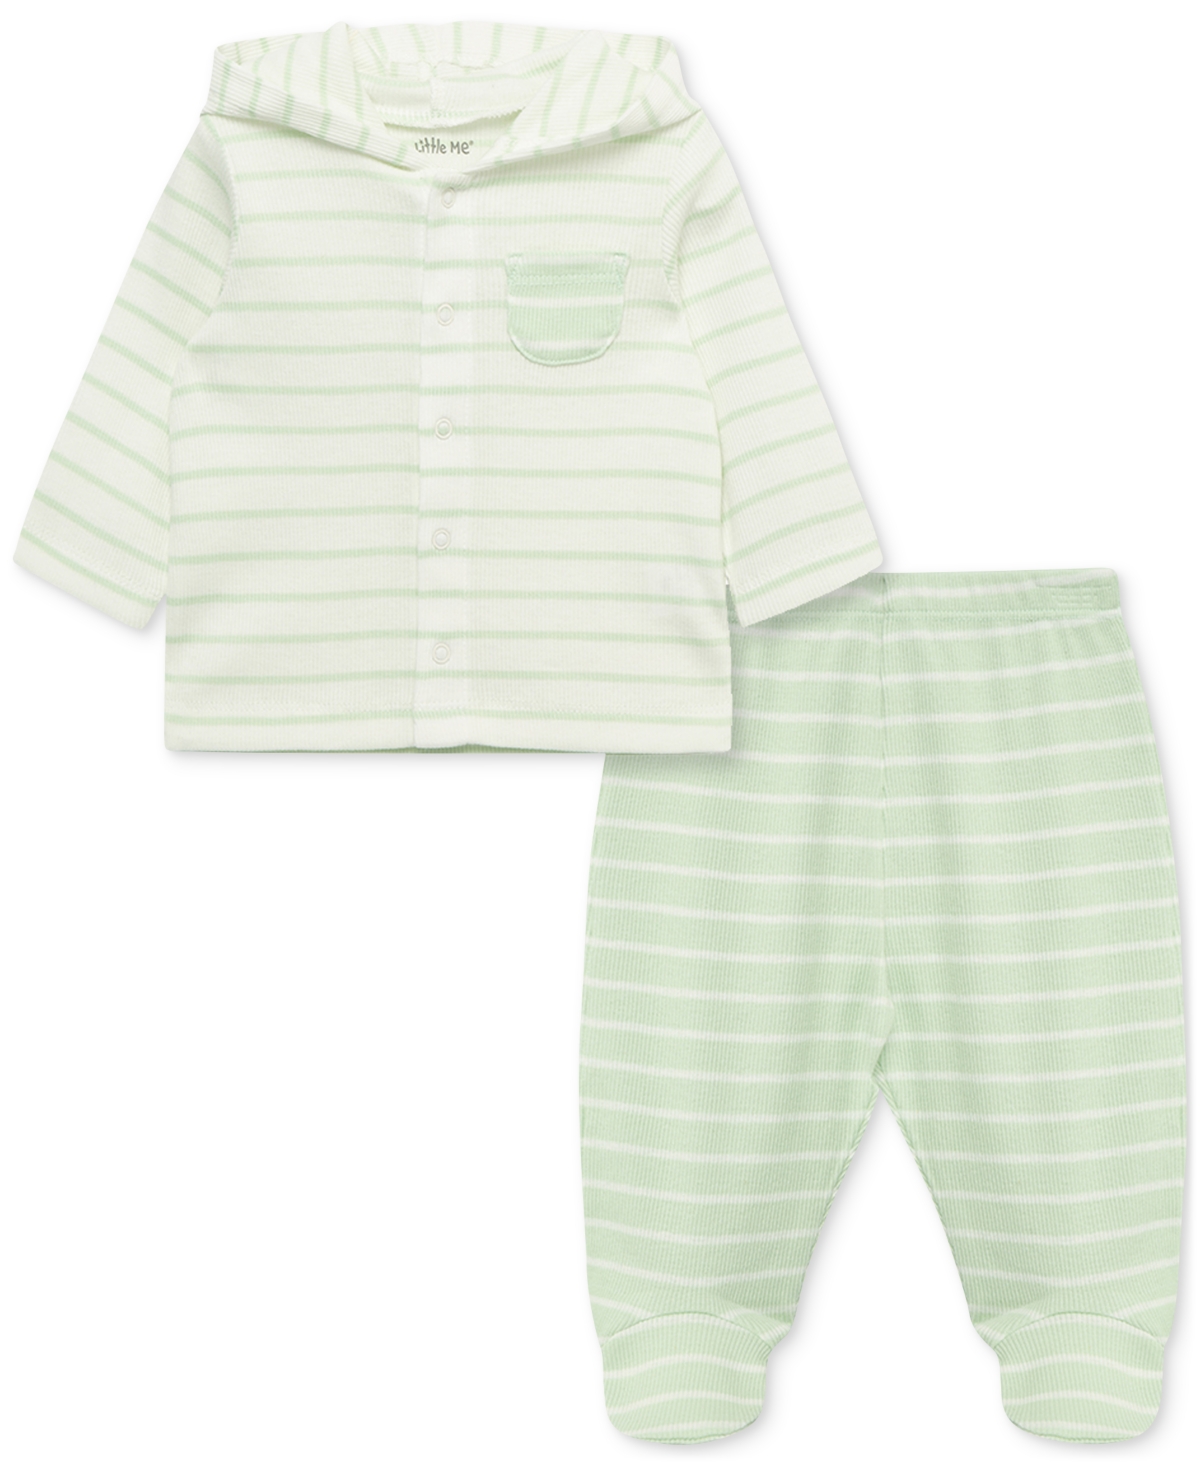 Little Me Baby Joy Striped Cardigan And Footed Pants, 2 Piece Set In Mint